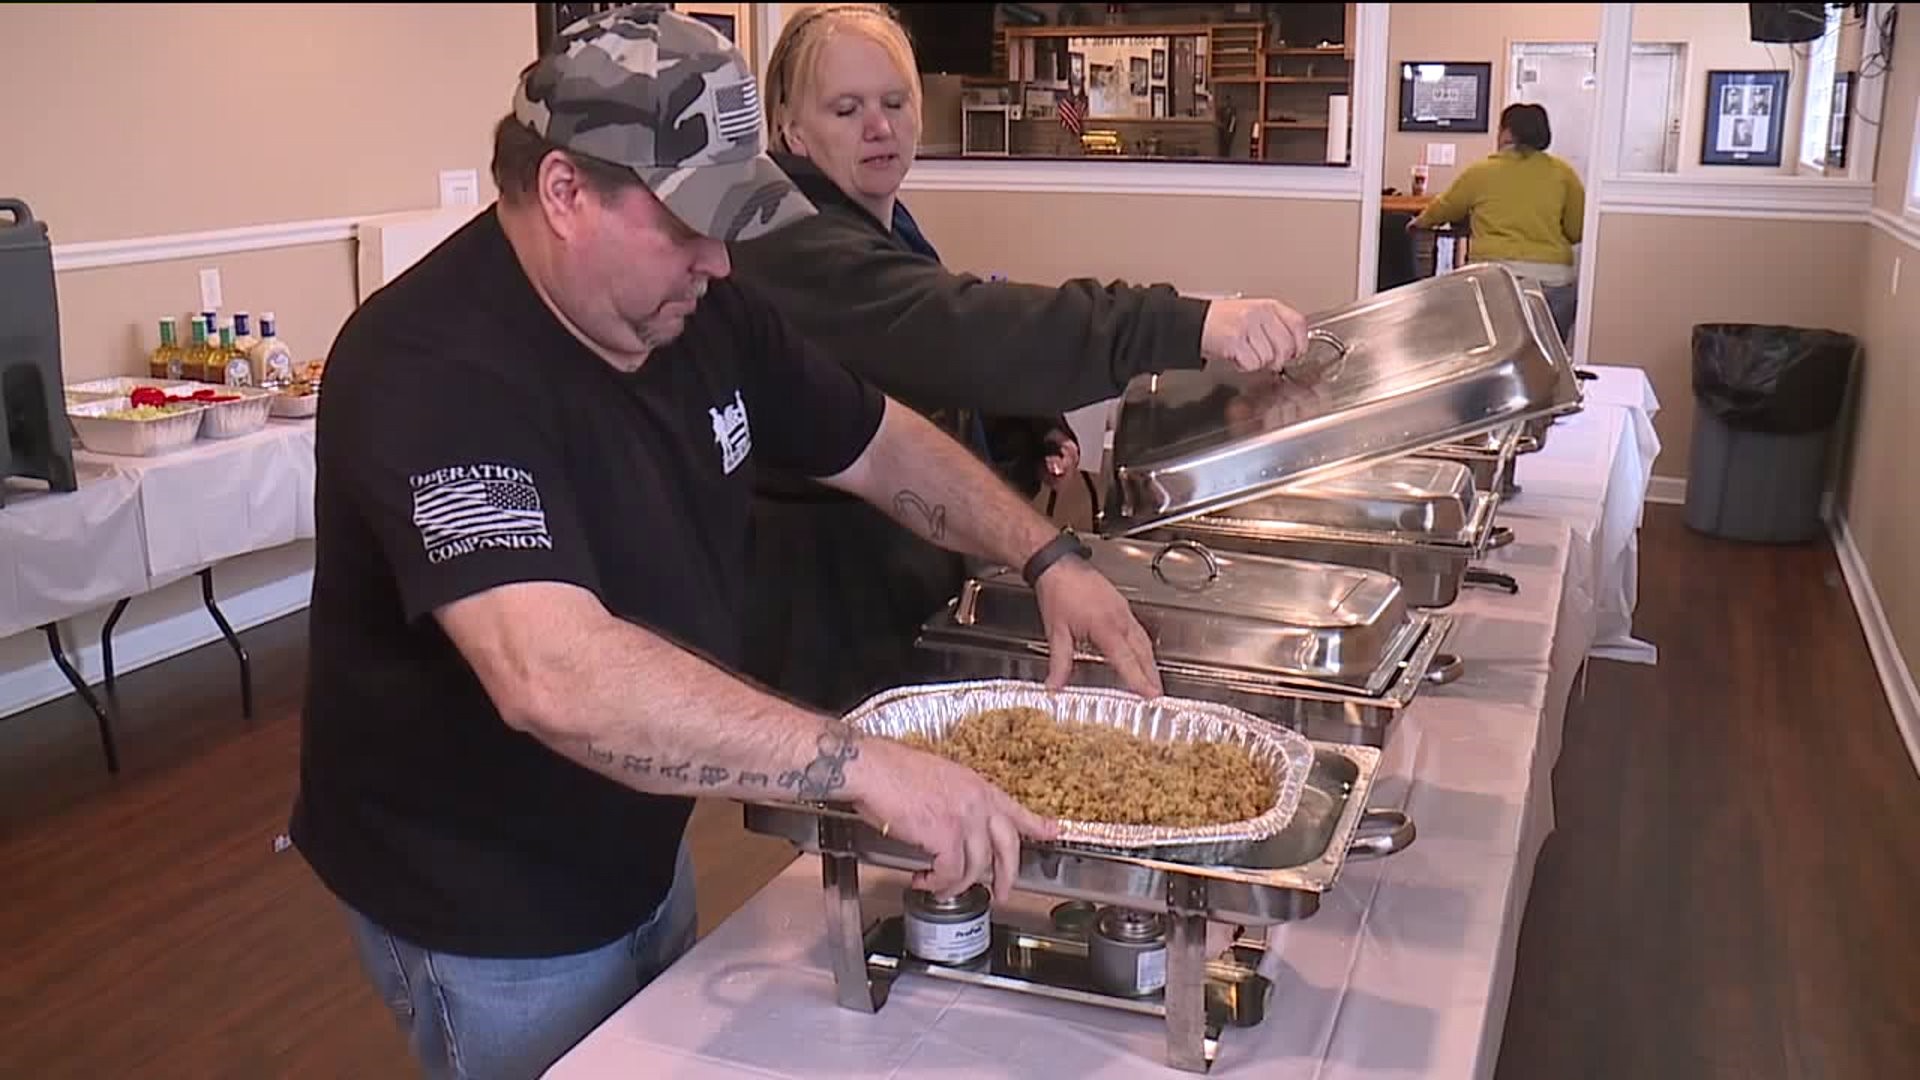 Veteran Cooking Up a Hot Meal for Fellow Vets in Scranton